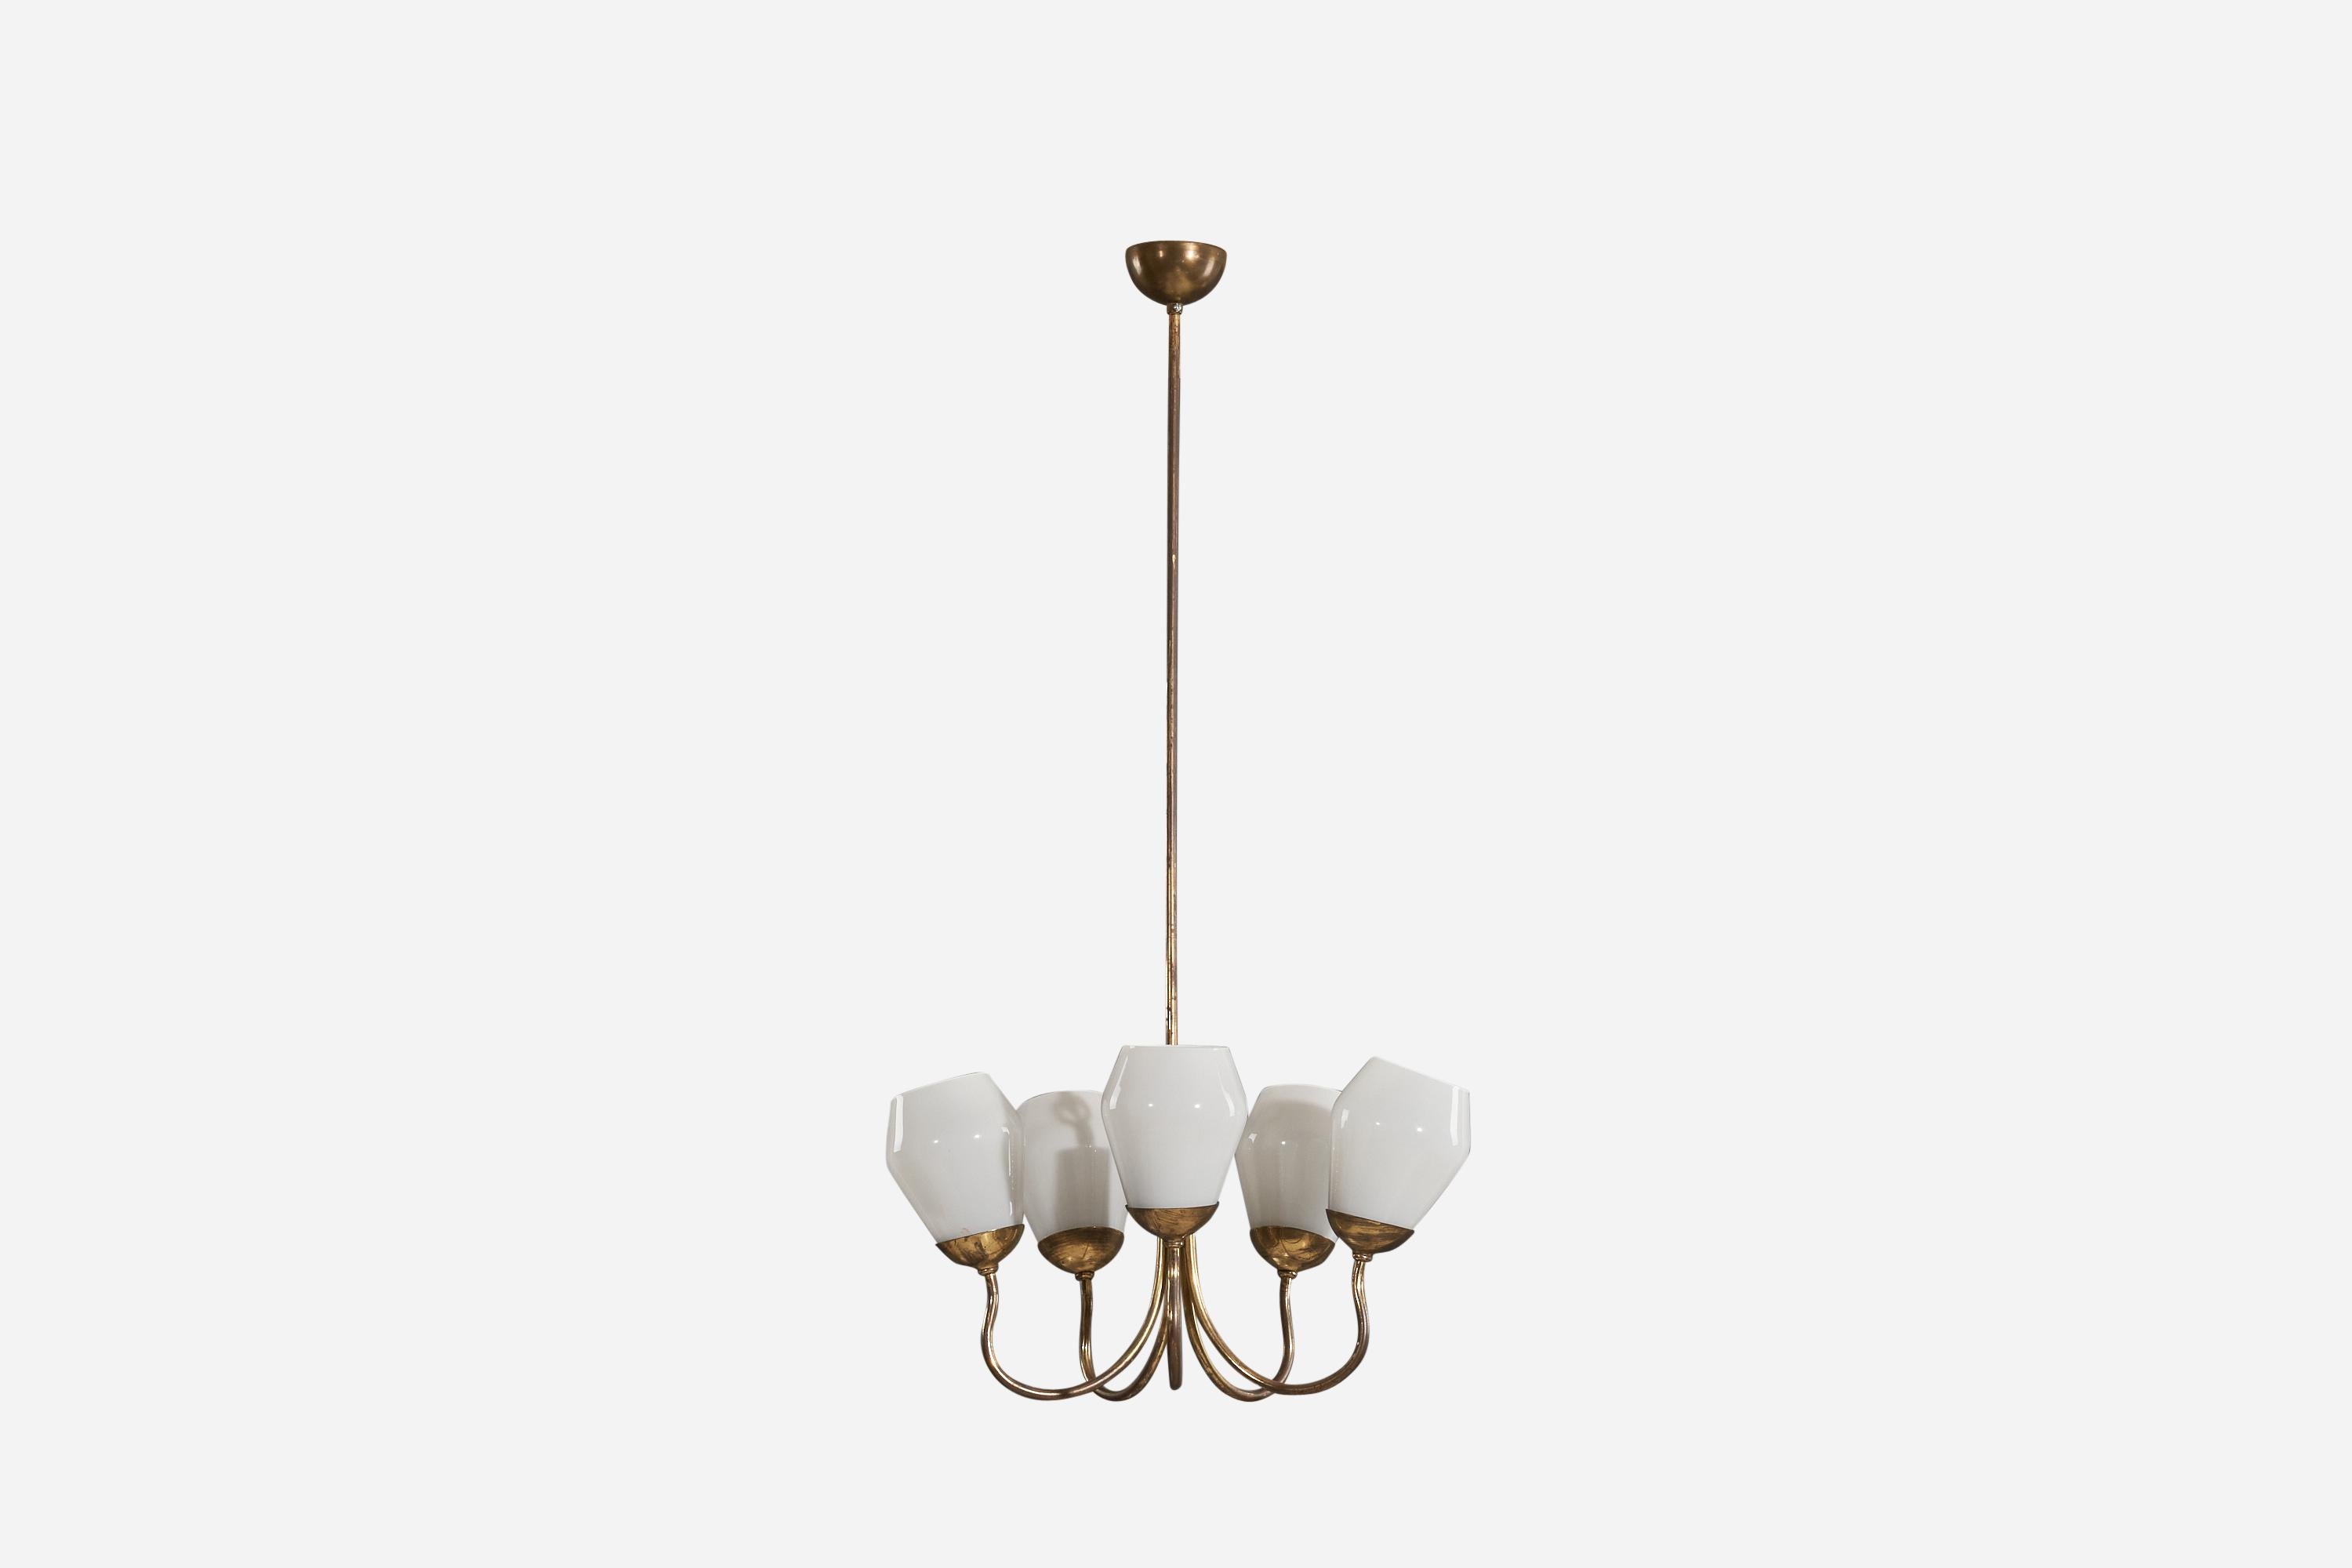 A brass and glass, five-armed chandelier designed by Gunnel Nyman and produced by Idman, Finland, 1940s.